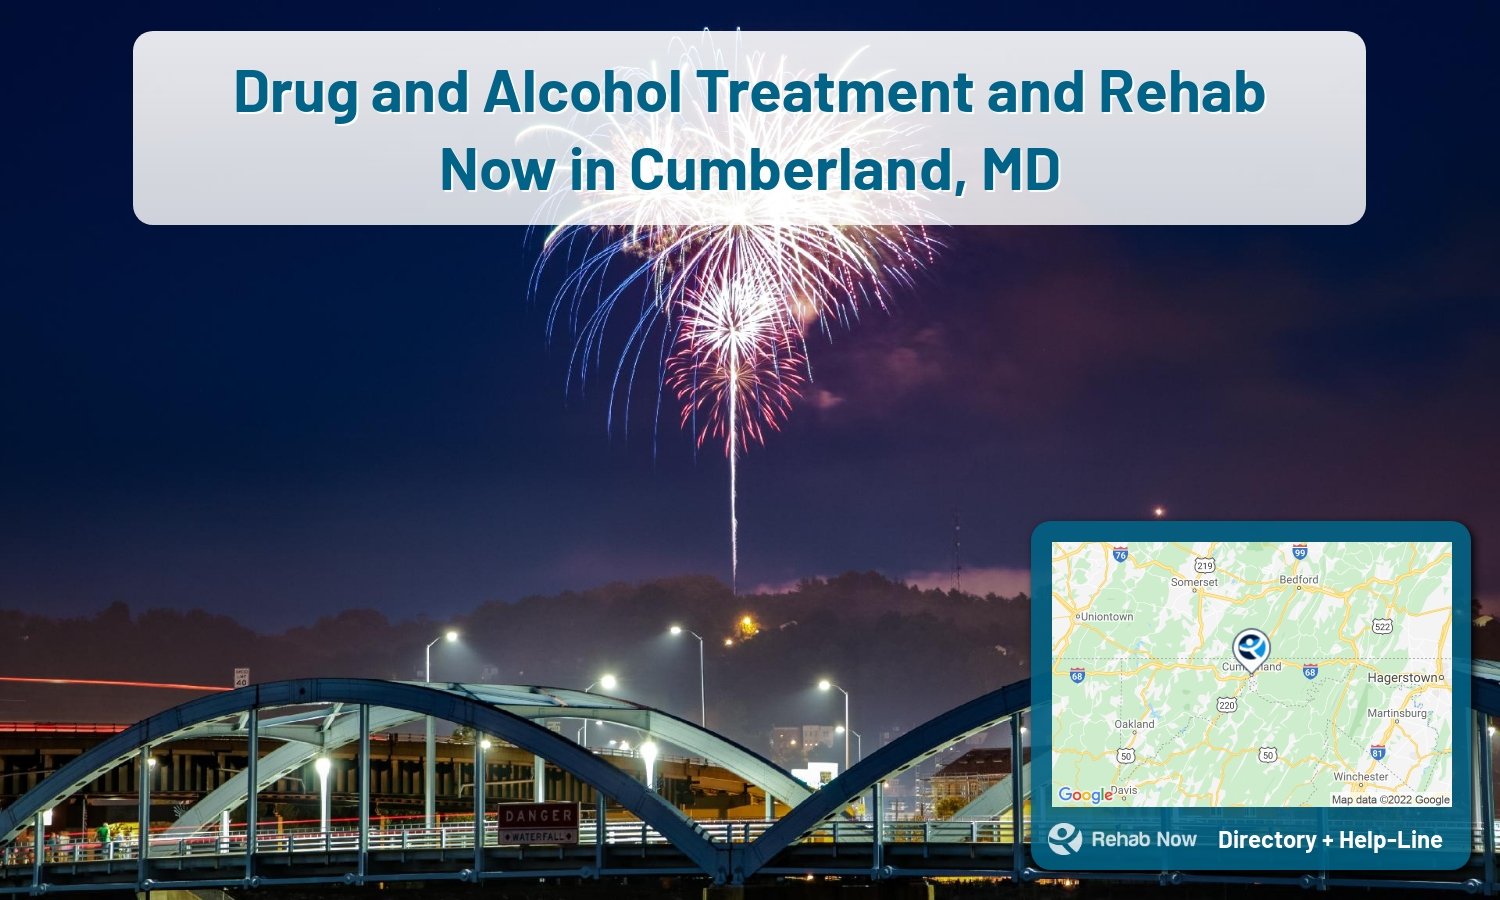 View options, availability, treatment methods, and more, for drug rehab and alcohol treatment in Cumberland, Maryland